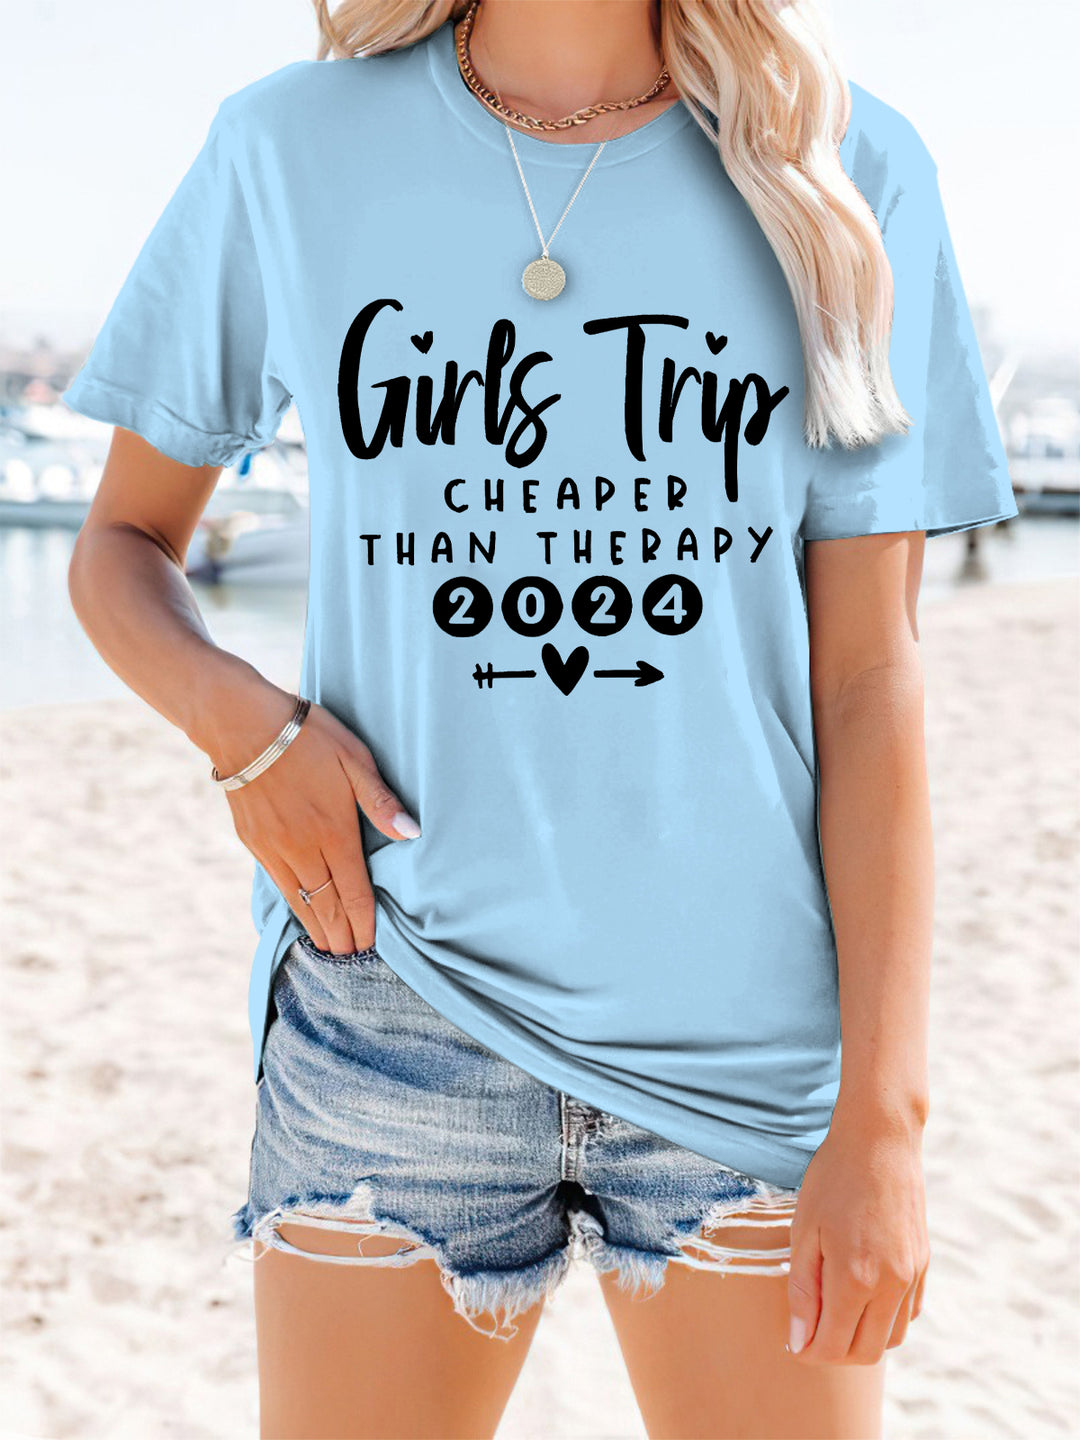 Girls Trip 2024 Cheaper Than Therapy Casual Short Sleeve T-shirt